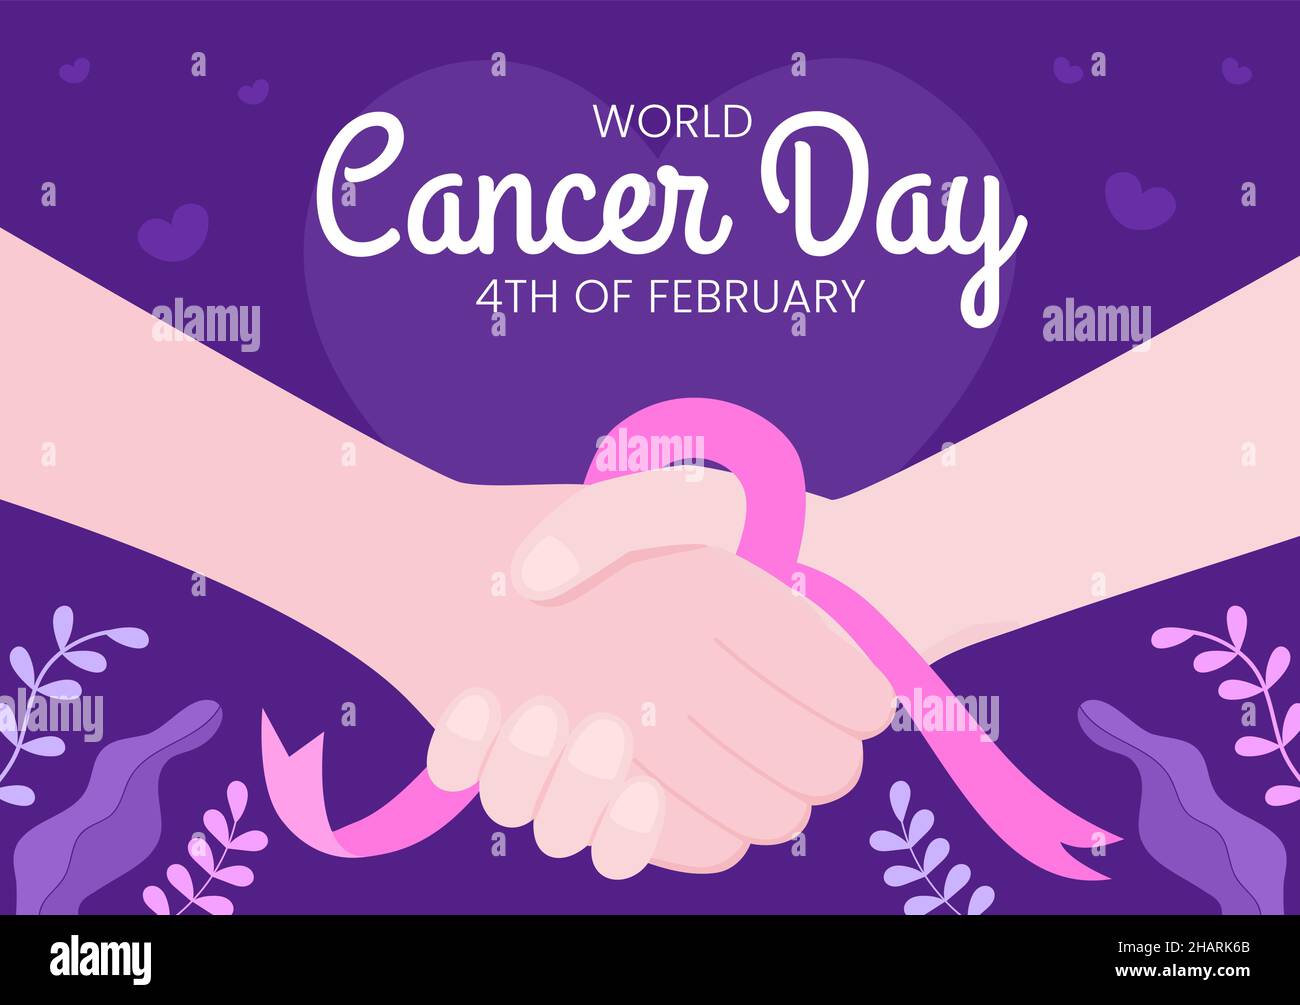 World Cancer Day with Ribbon Flat Vector Illustration. Inform the Public About Disease Awareness on February 4th Through Campaign Background or Poster Stock Vector